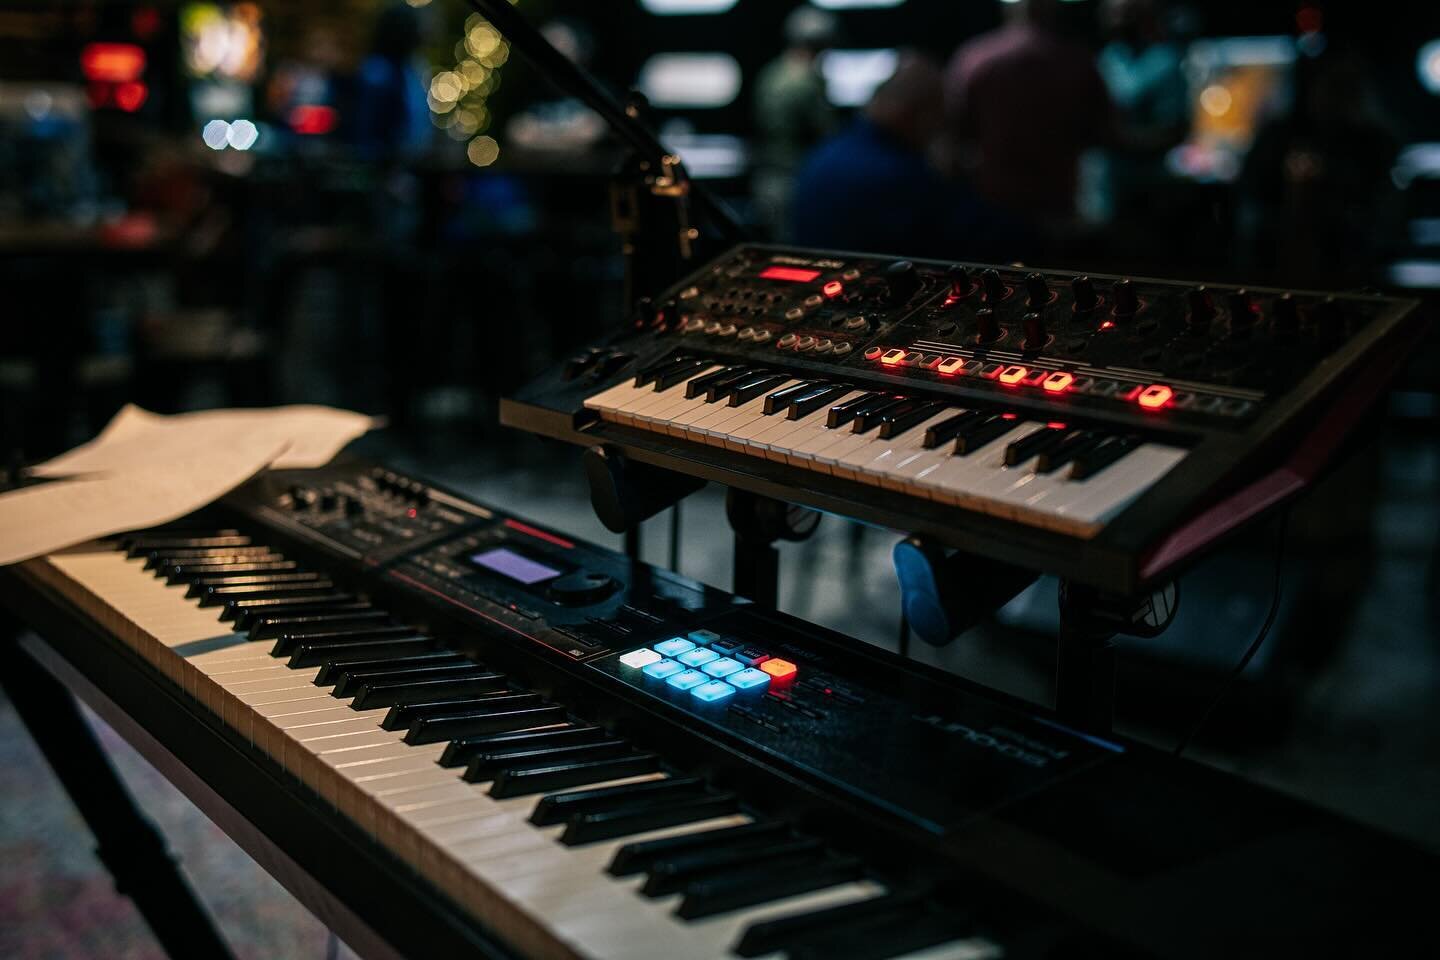 The keys are calling &mdash; it&rsquo;s open jam night, let&rsquo;s go!